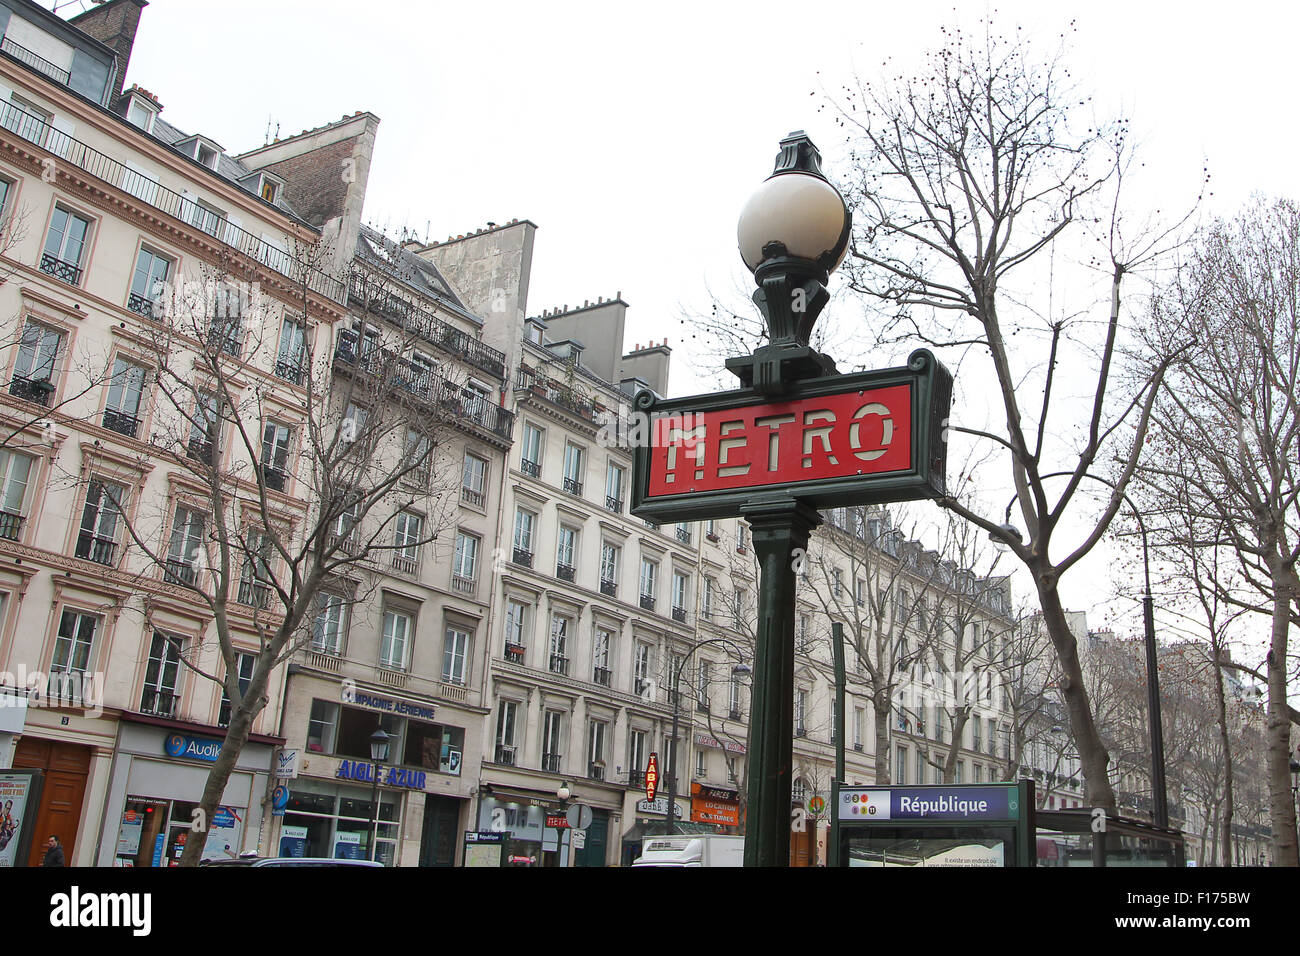 A Photography of A Metro sign in Paris, France Stock Photo